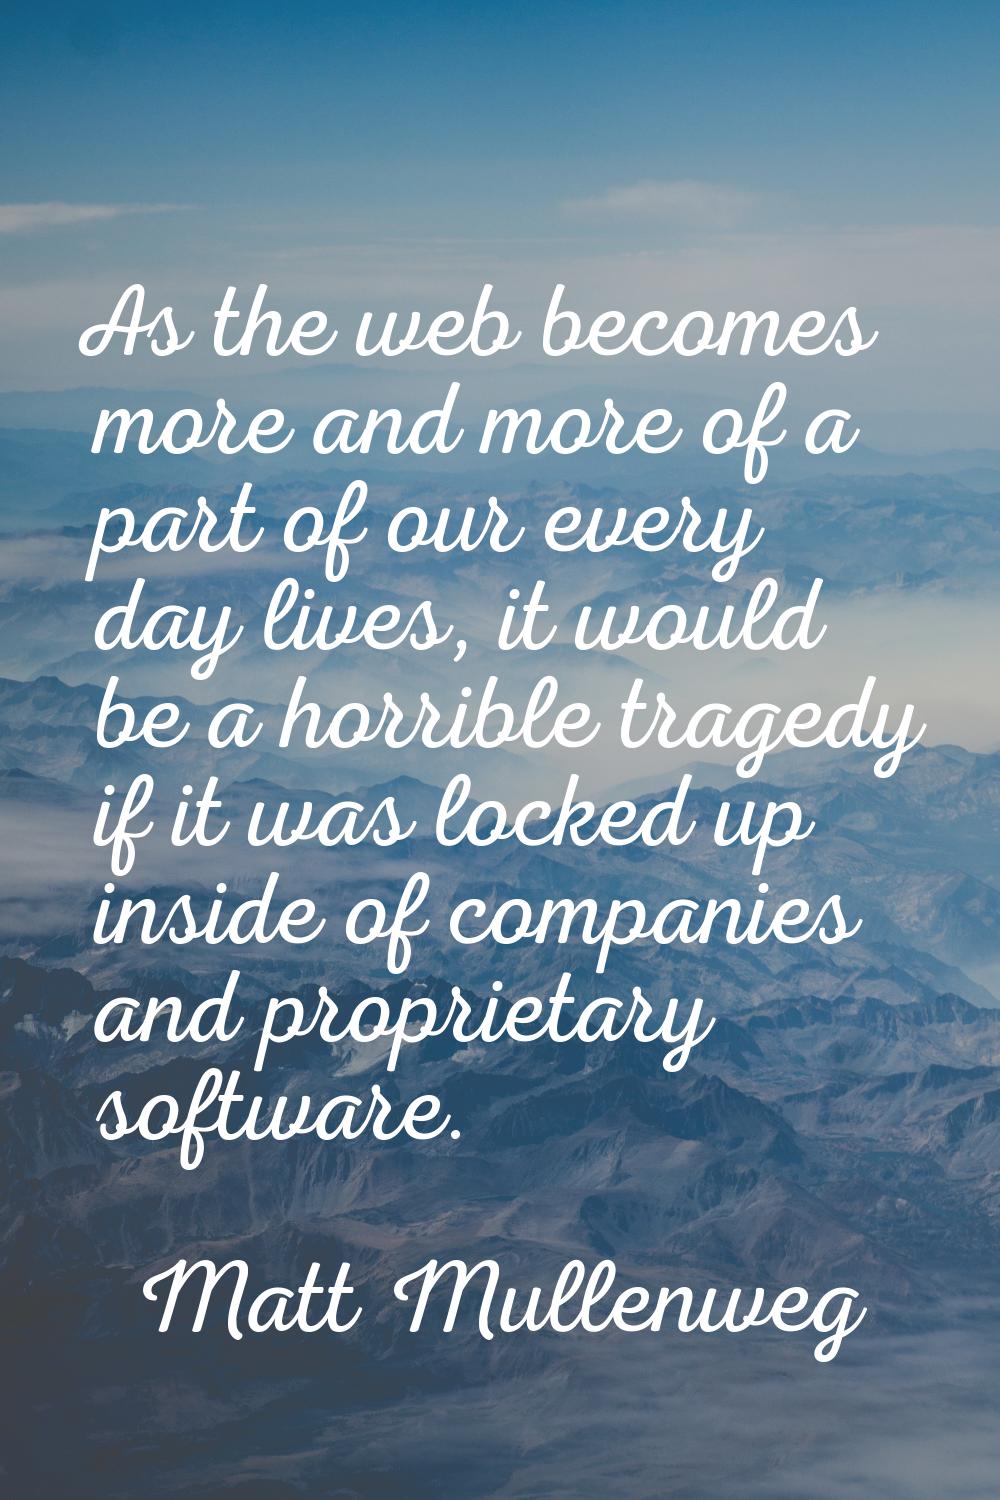 As the web becomes more and more of a part of our every day lives, it would be a horrible tragedy i